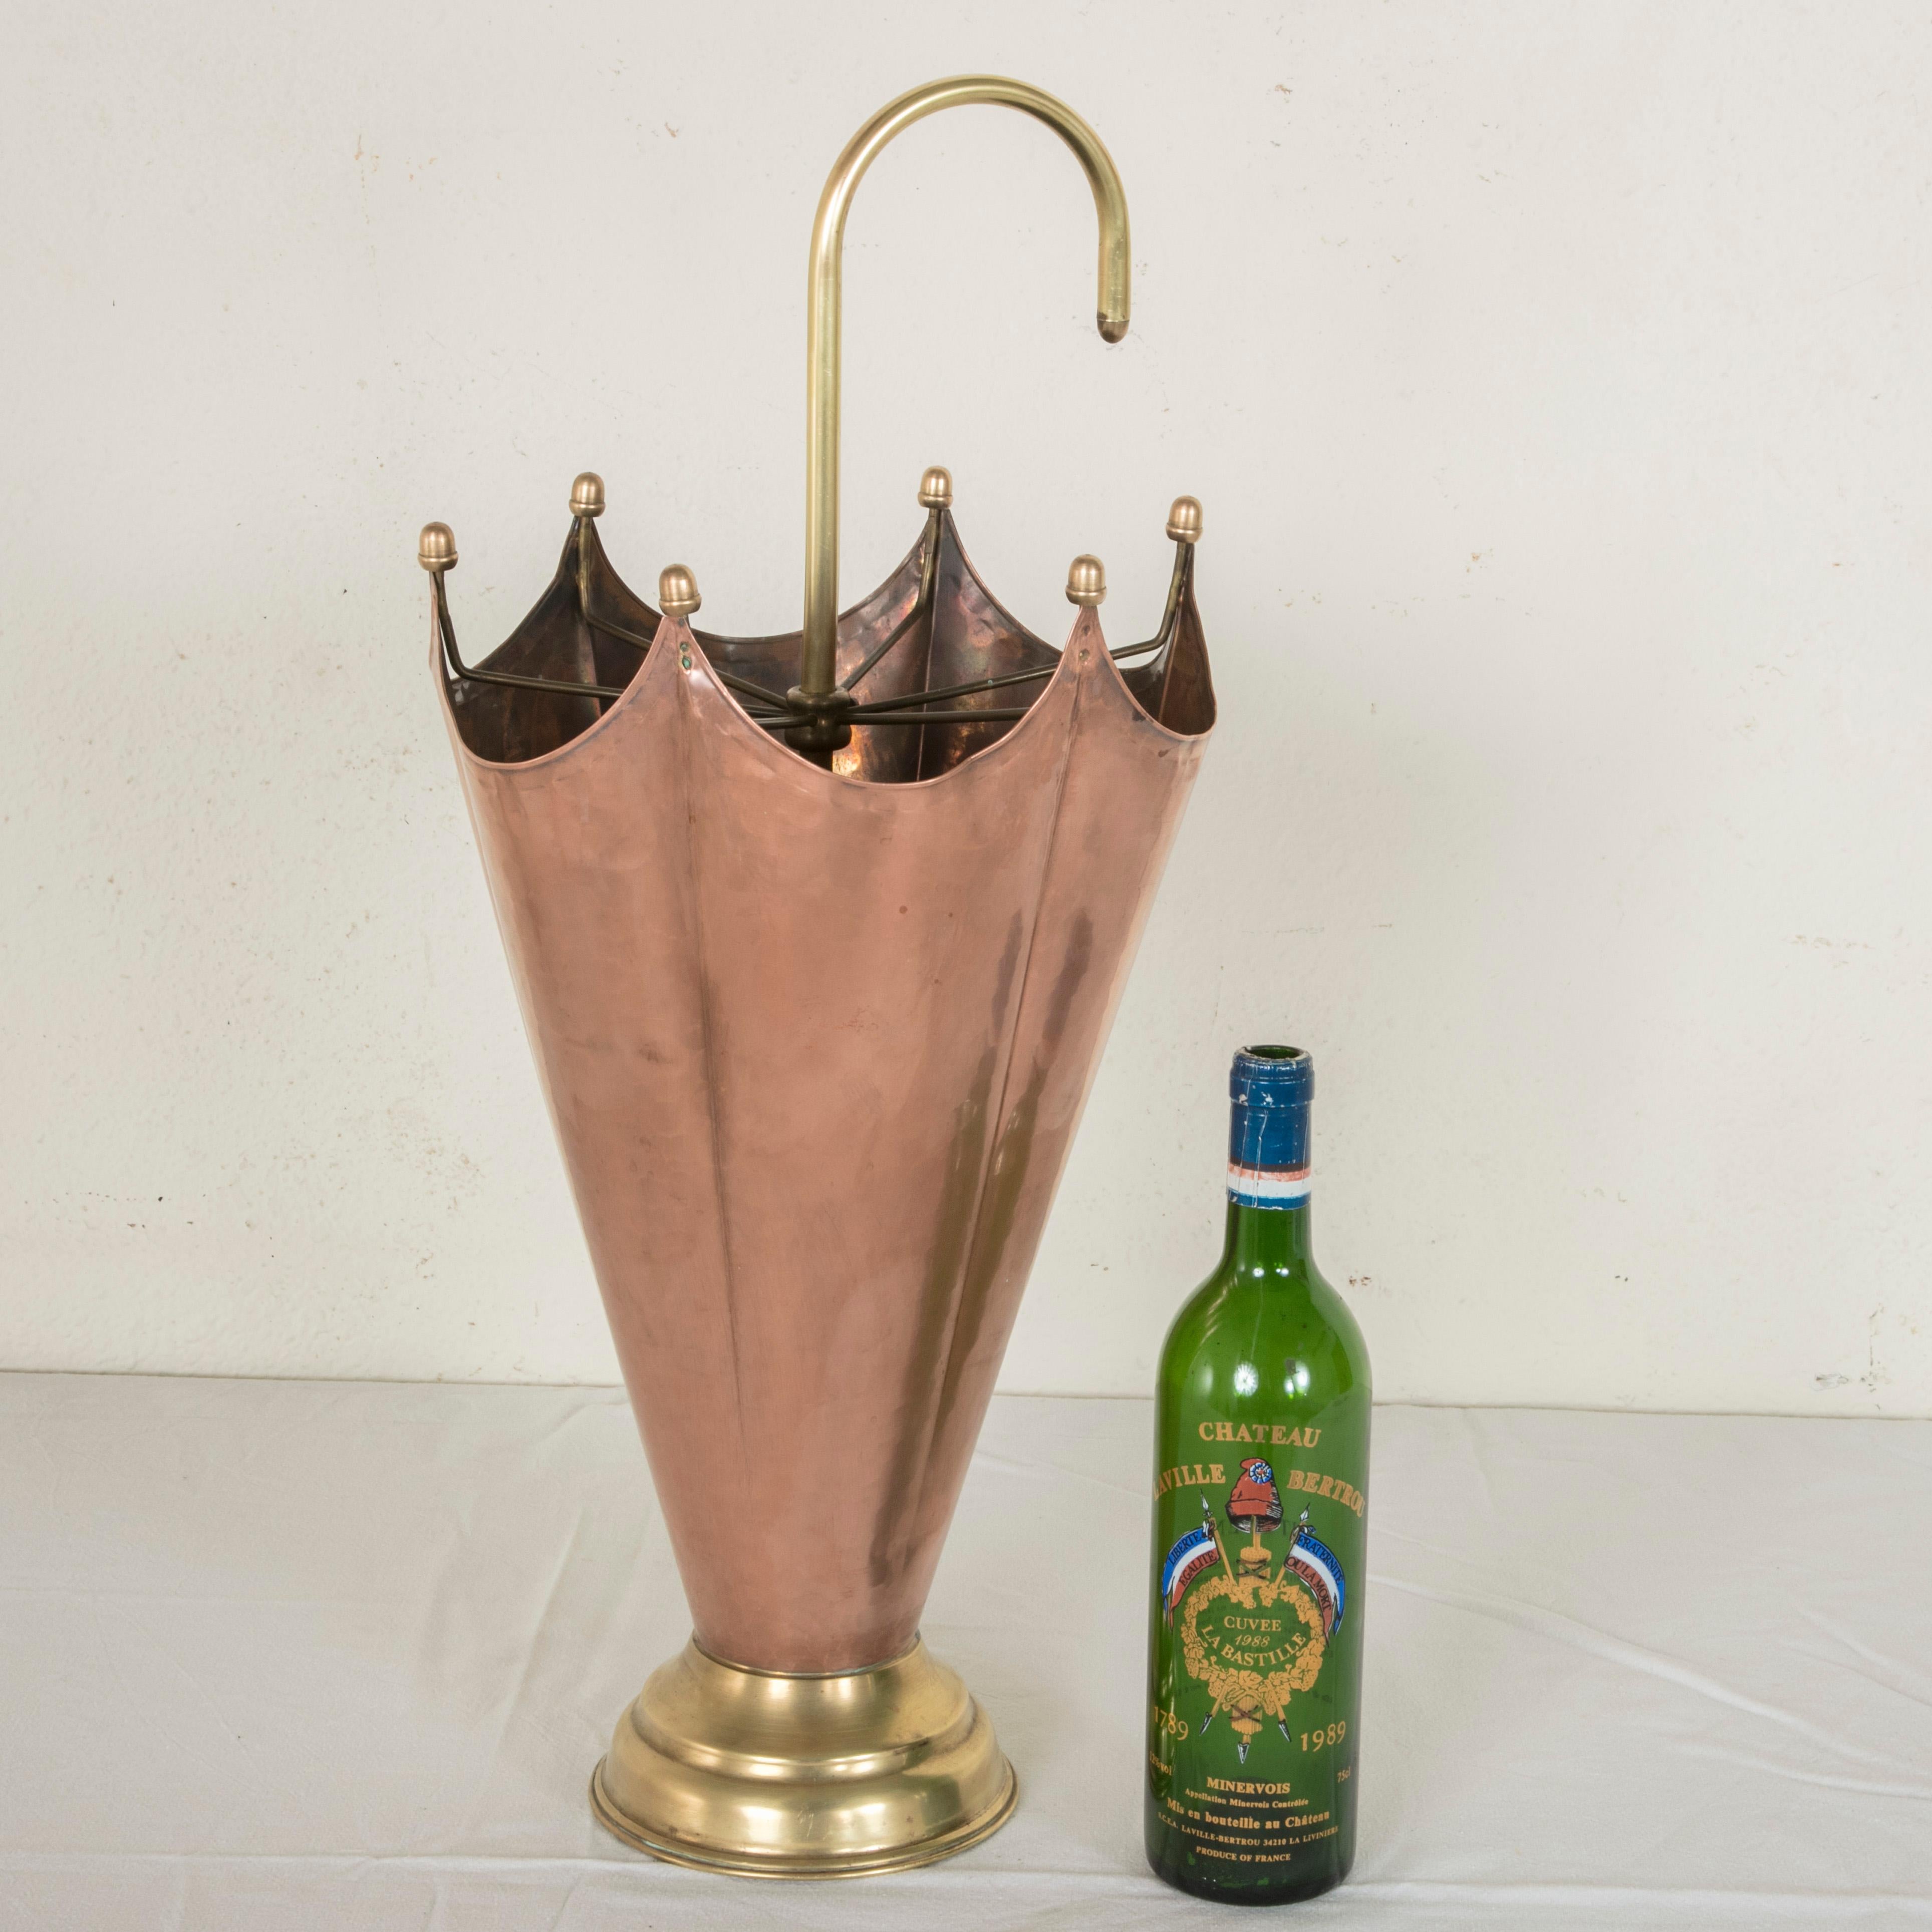 Midcentury French Copper and Brass Umbrella Holder or Umbrella Stand 1